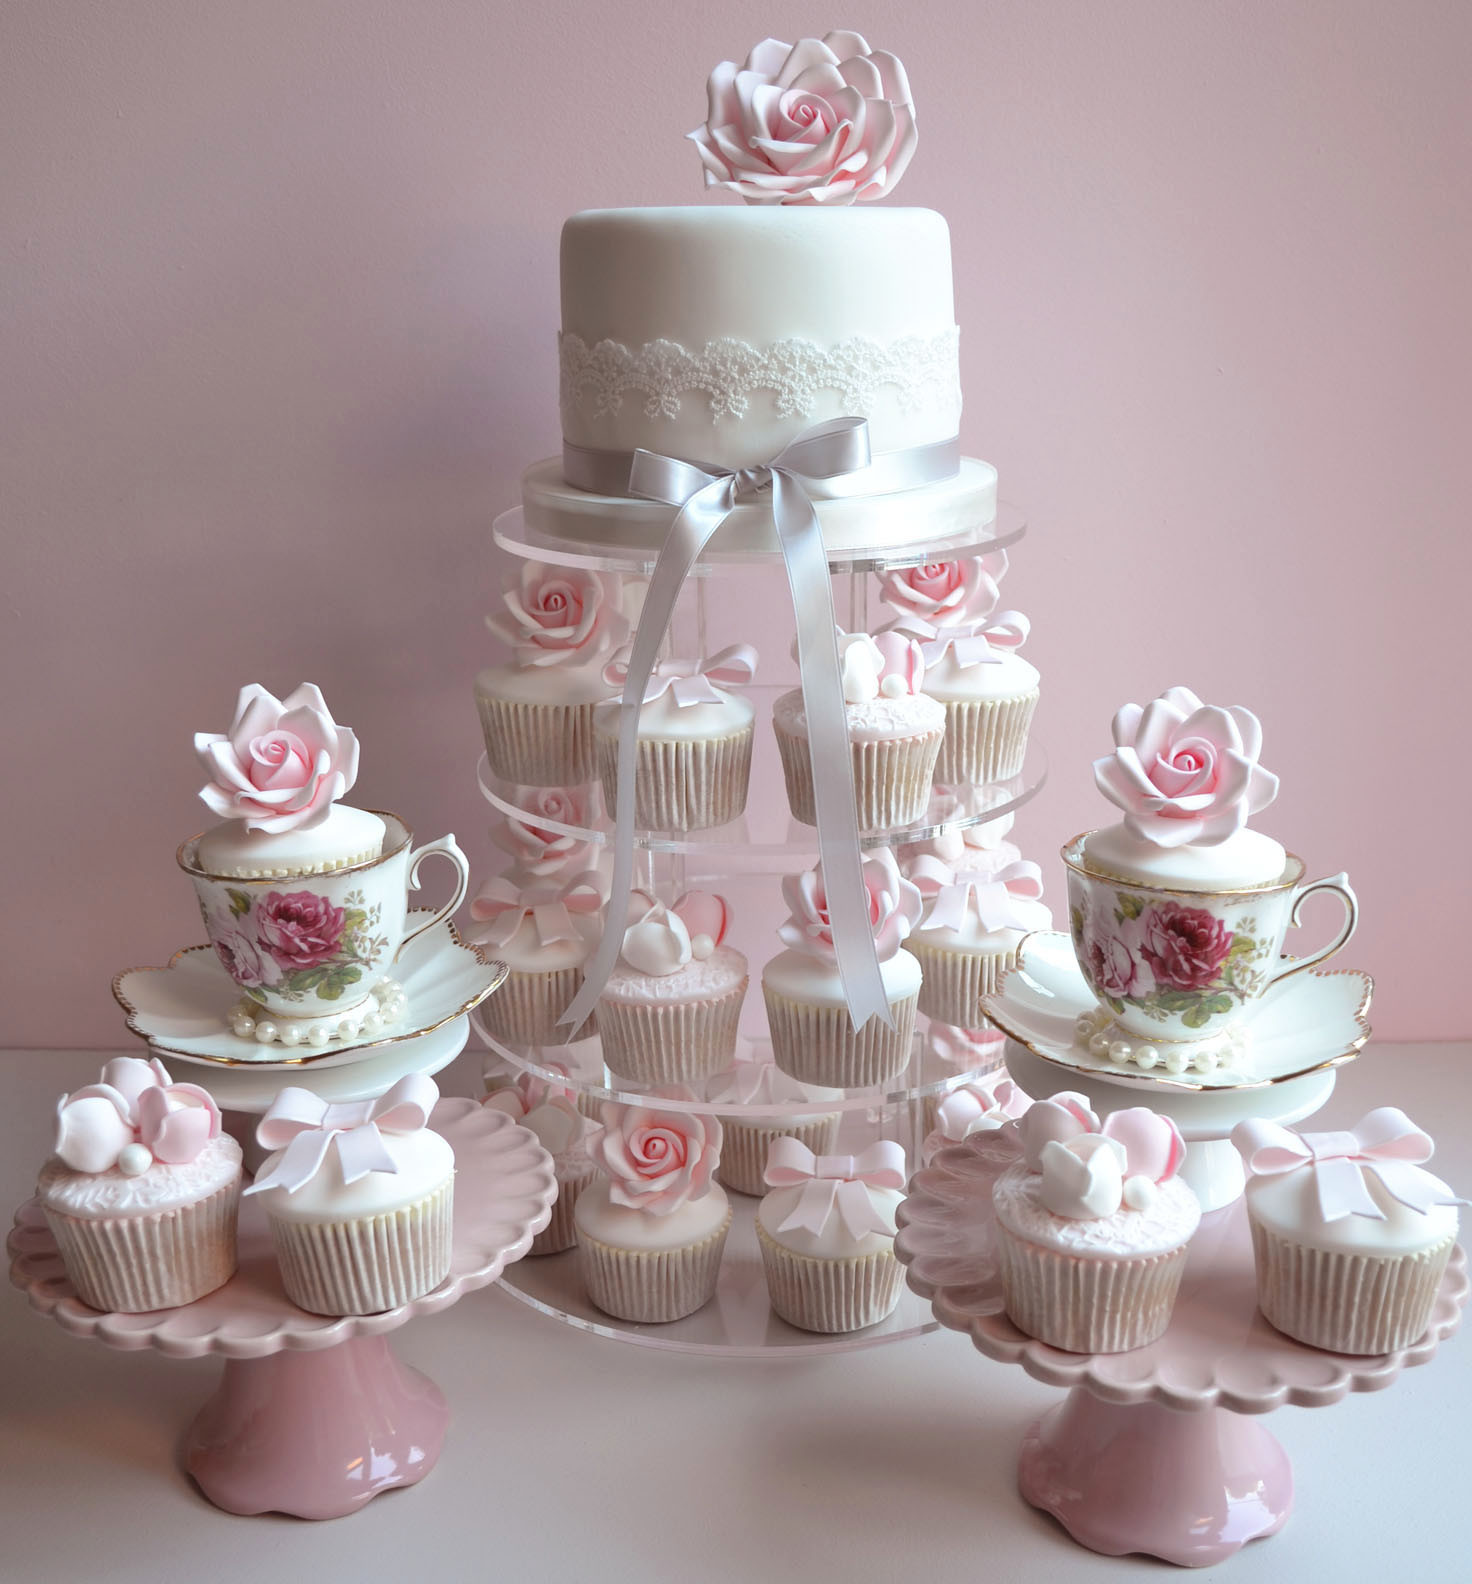 Wedding Cakes With Cupcakes
 Little Paper Cakes Beautiful Vintage Wedding Cupcakes